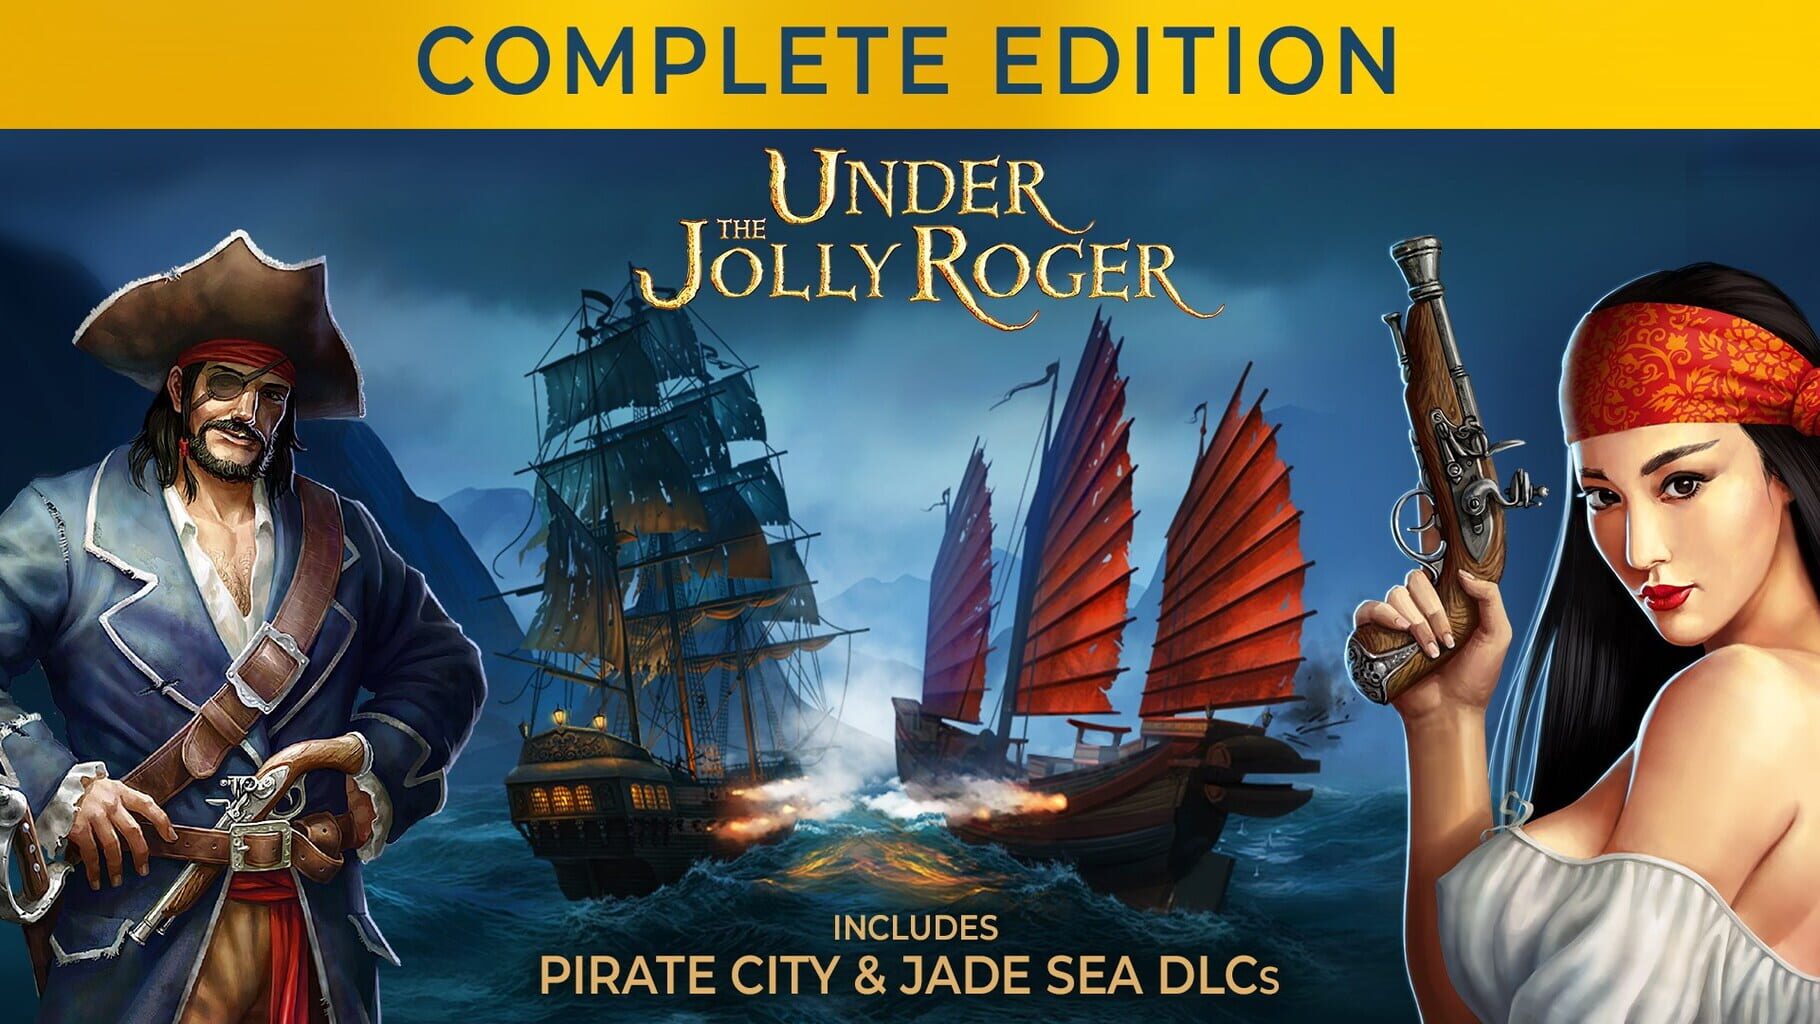 Under the Jolly Roger: Complete Edition artwork